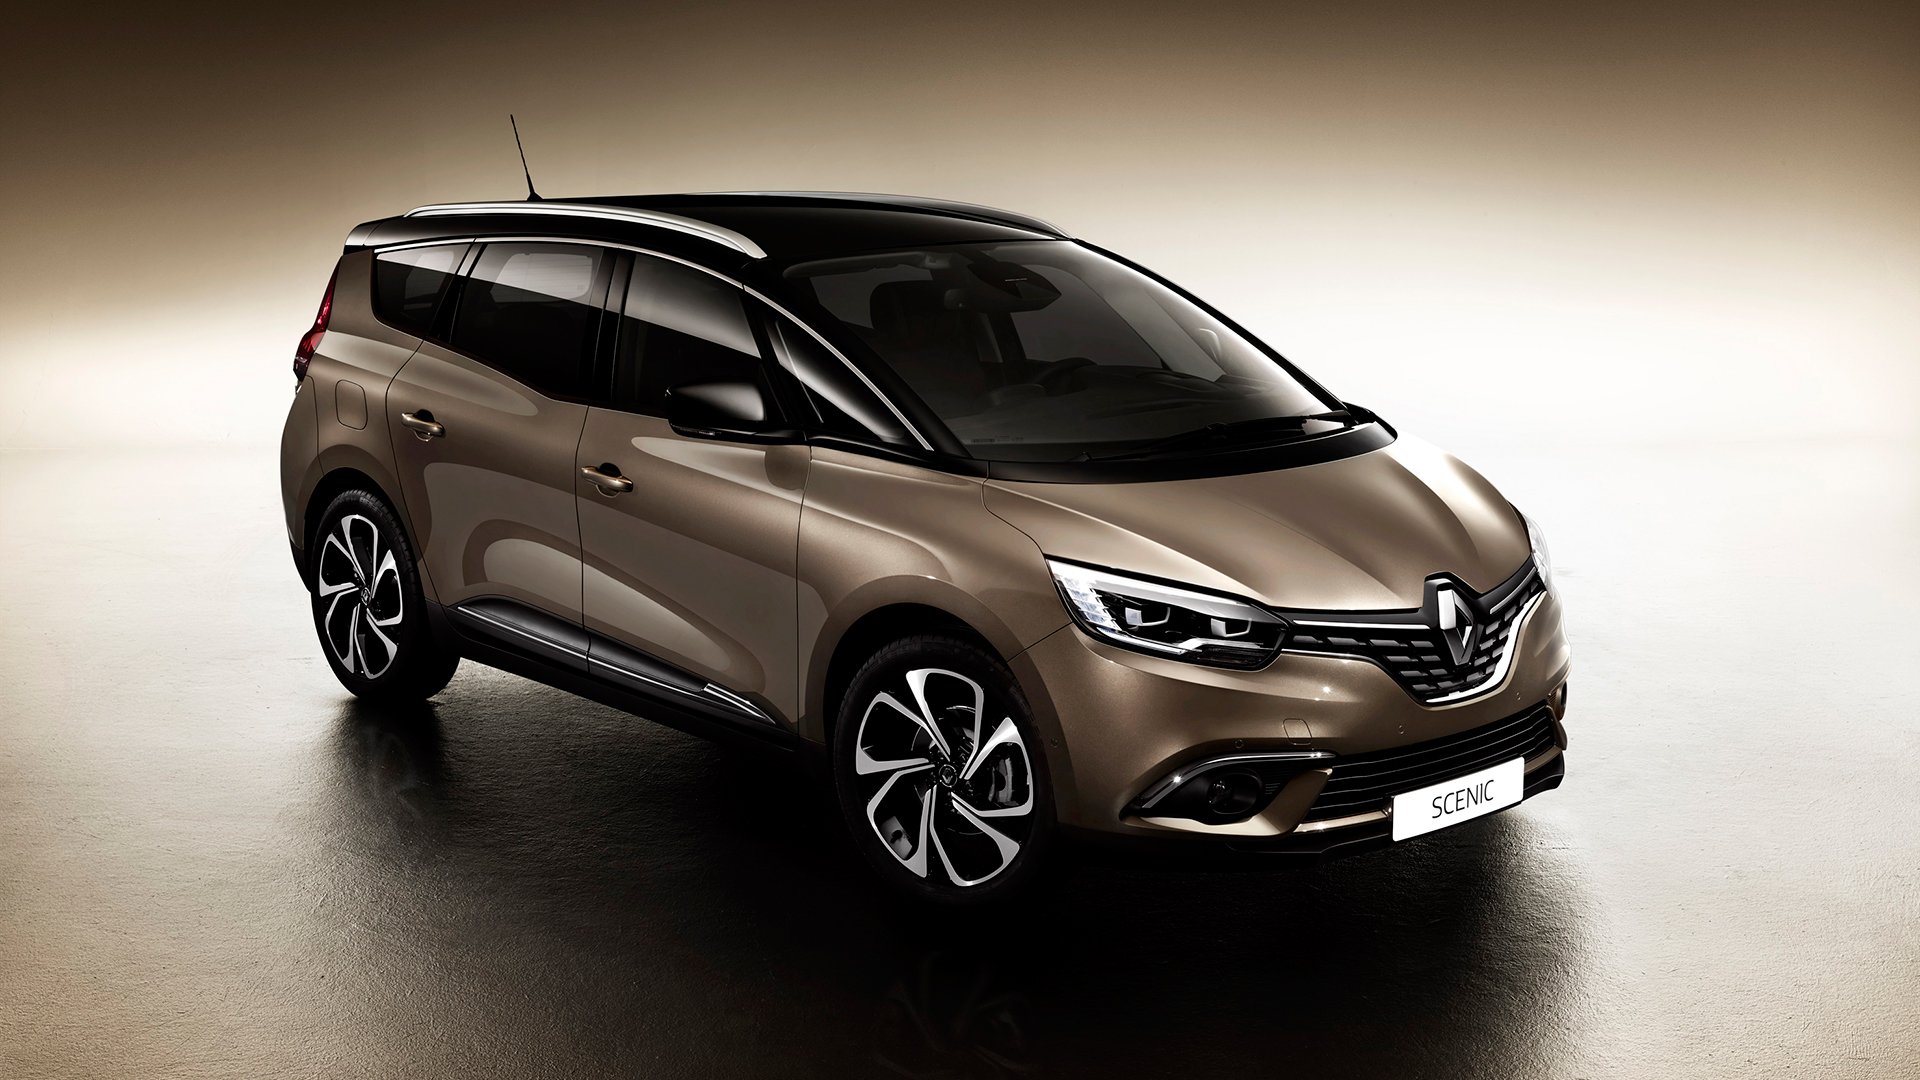 Stuwkracht Oprecht Smash Renault reveals all-new Grand Scenic MPV | AutoTrader